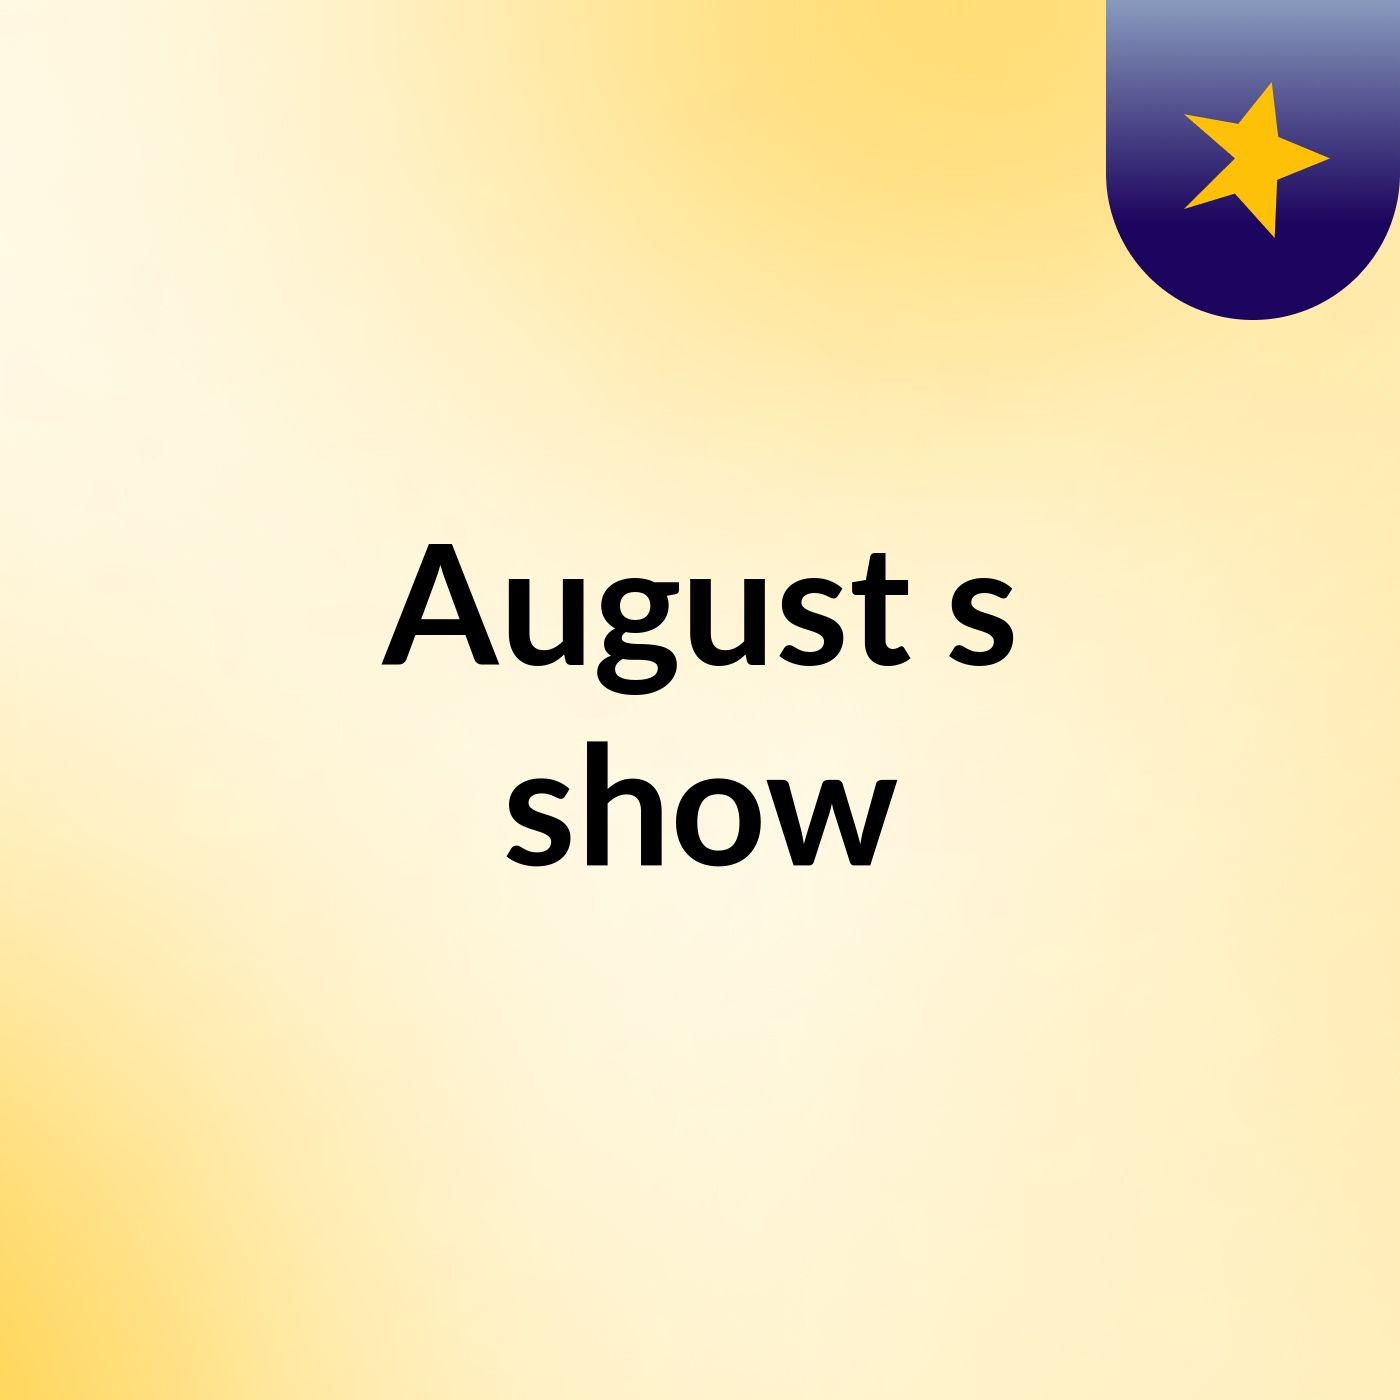 August's show